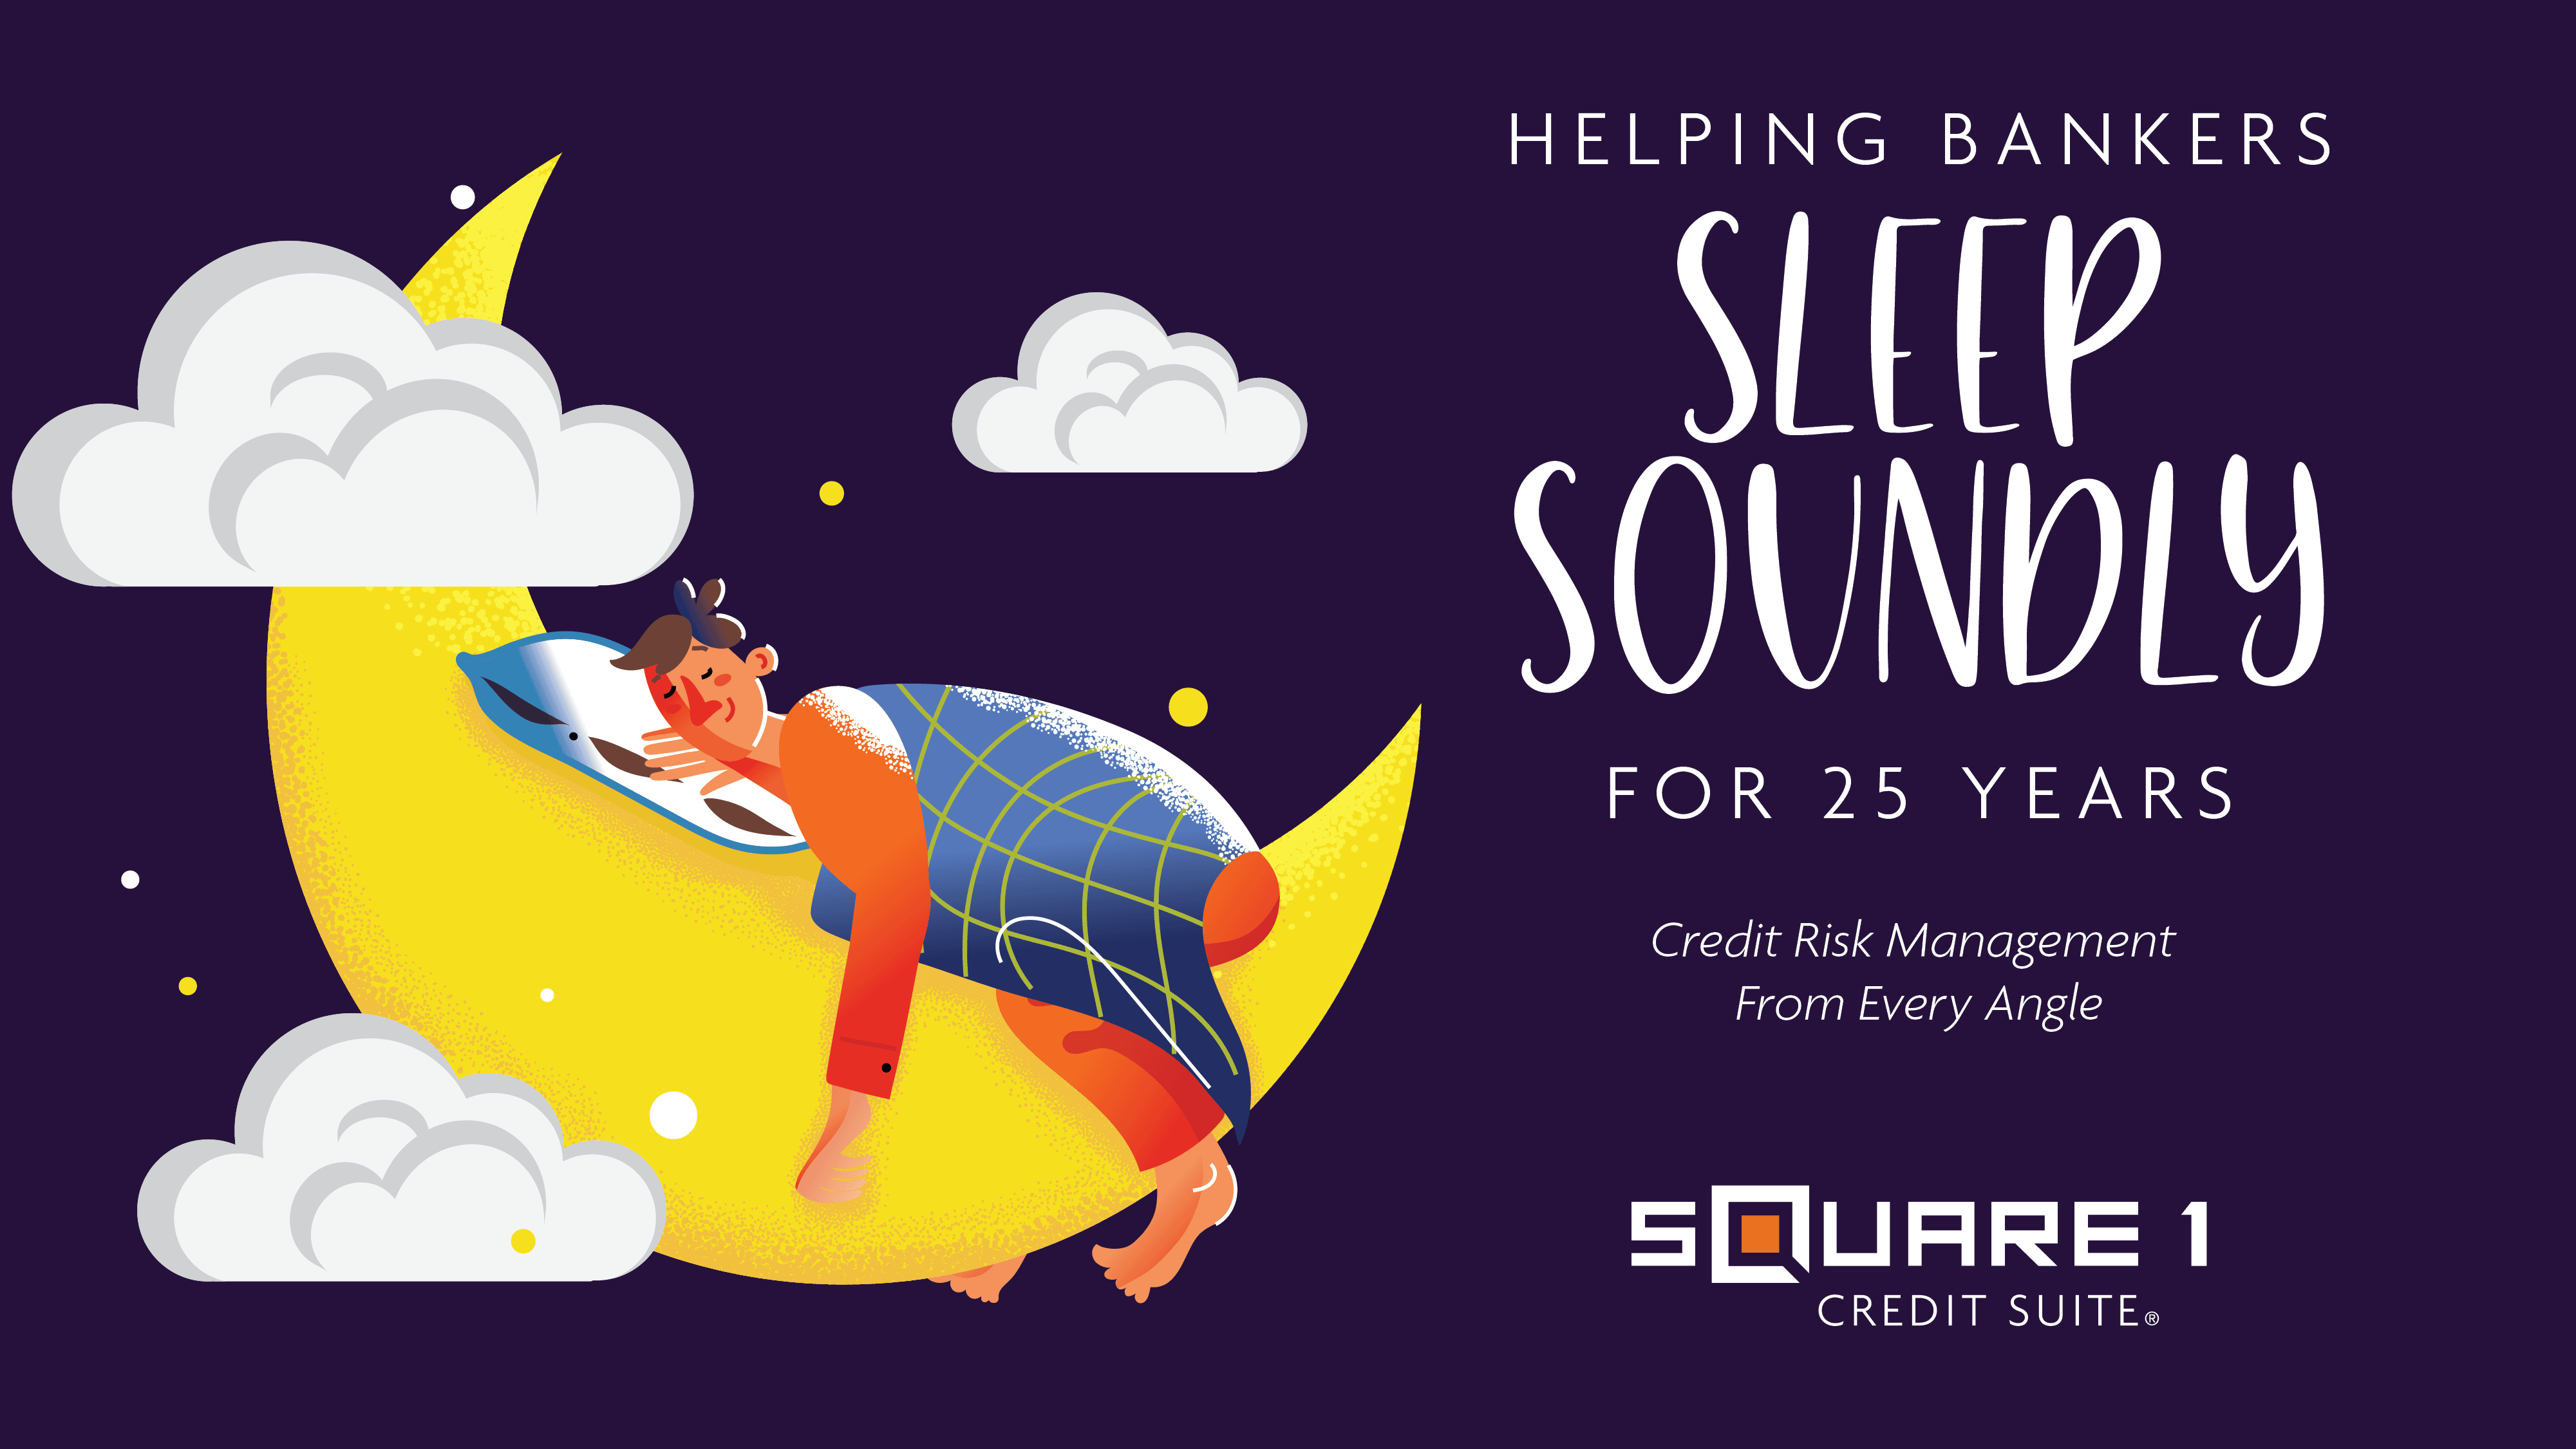 image of man sleeping on a crescent moon, Helping Bankers Sleep Sounds for 25 Years, Credit Risk Management from Every Angle, Square 1 Credit Suite